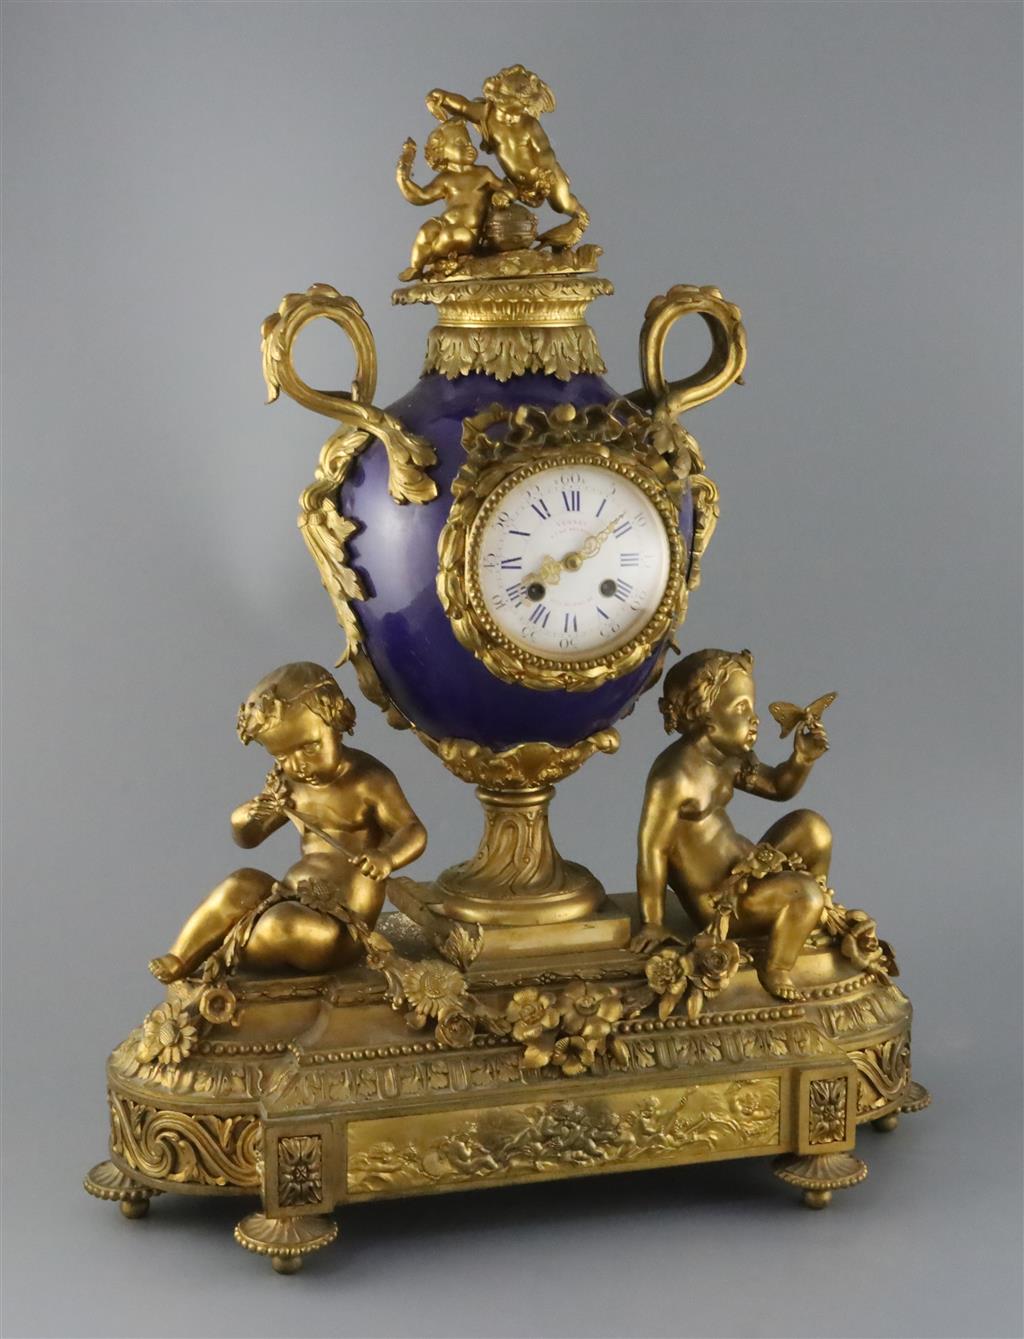 Vernet, Rue du Bac 42. A 19th century French ormolu and bleu du roi porcelain mantel clock, width 19in. depth 7.5in. height 23in.